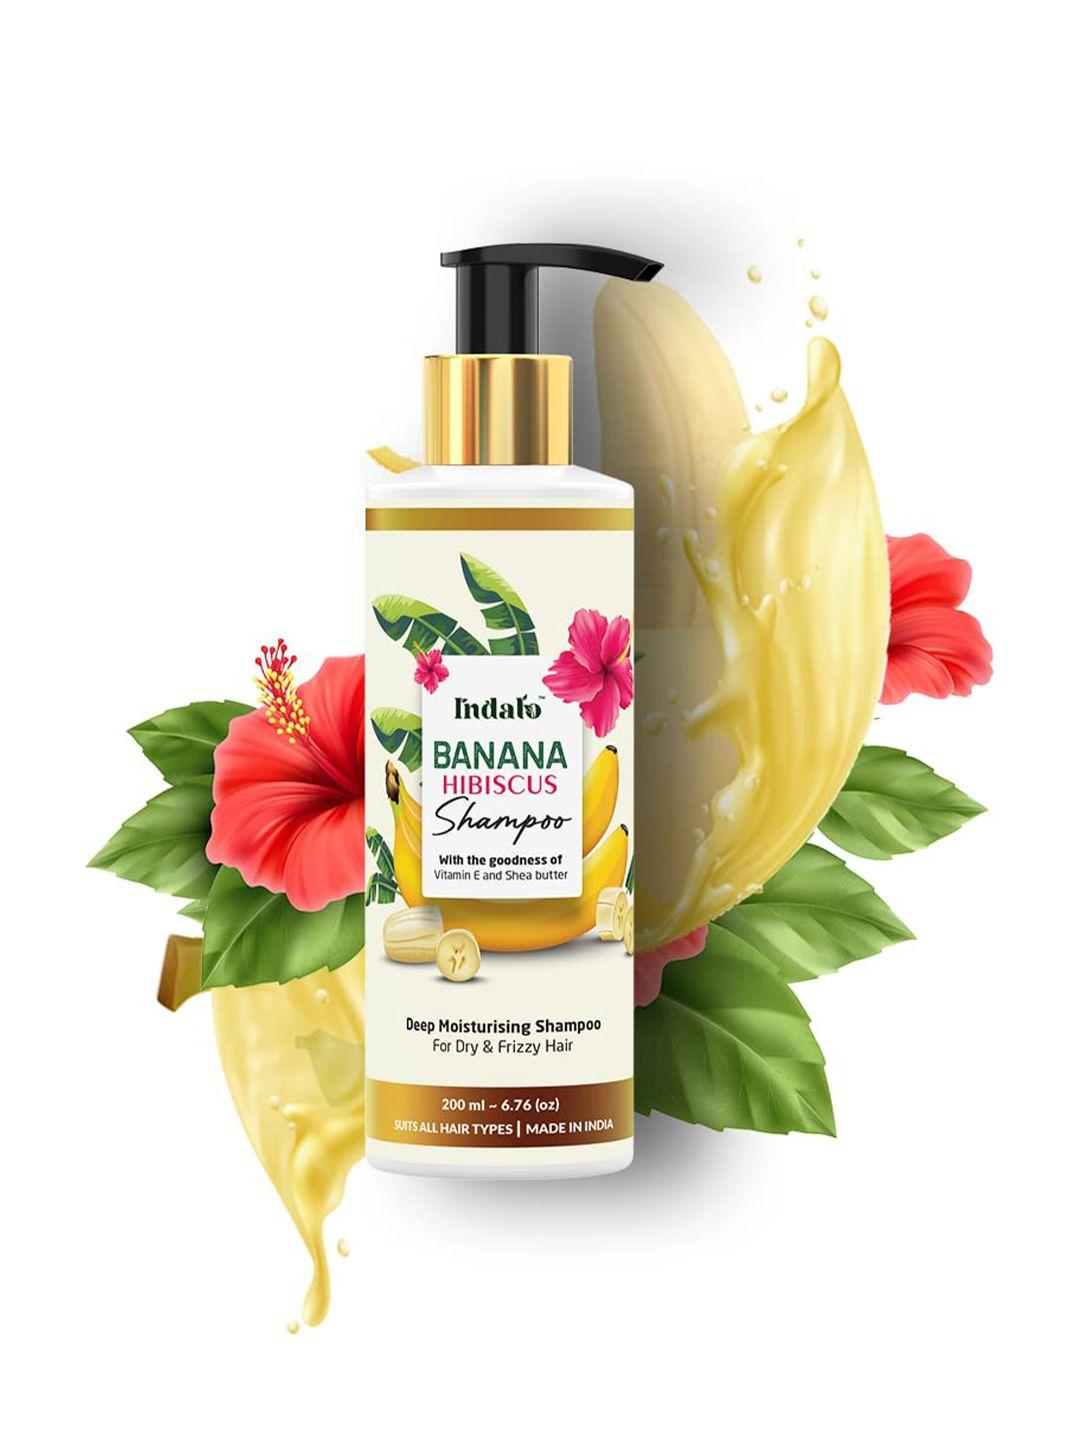 indalo banana hibiscus shampoo with vitamin e & shea butter for dry & frizzy hair - 200ml